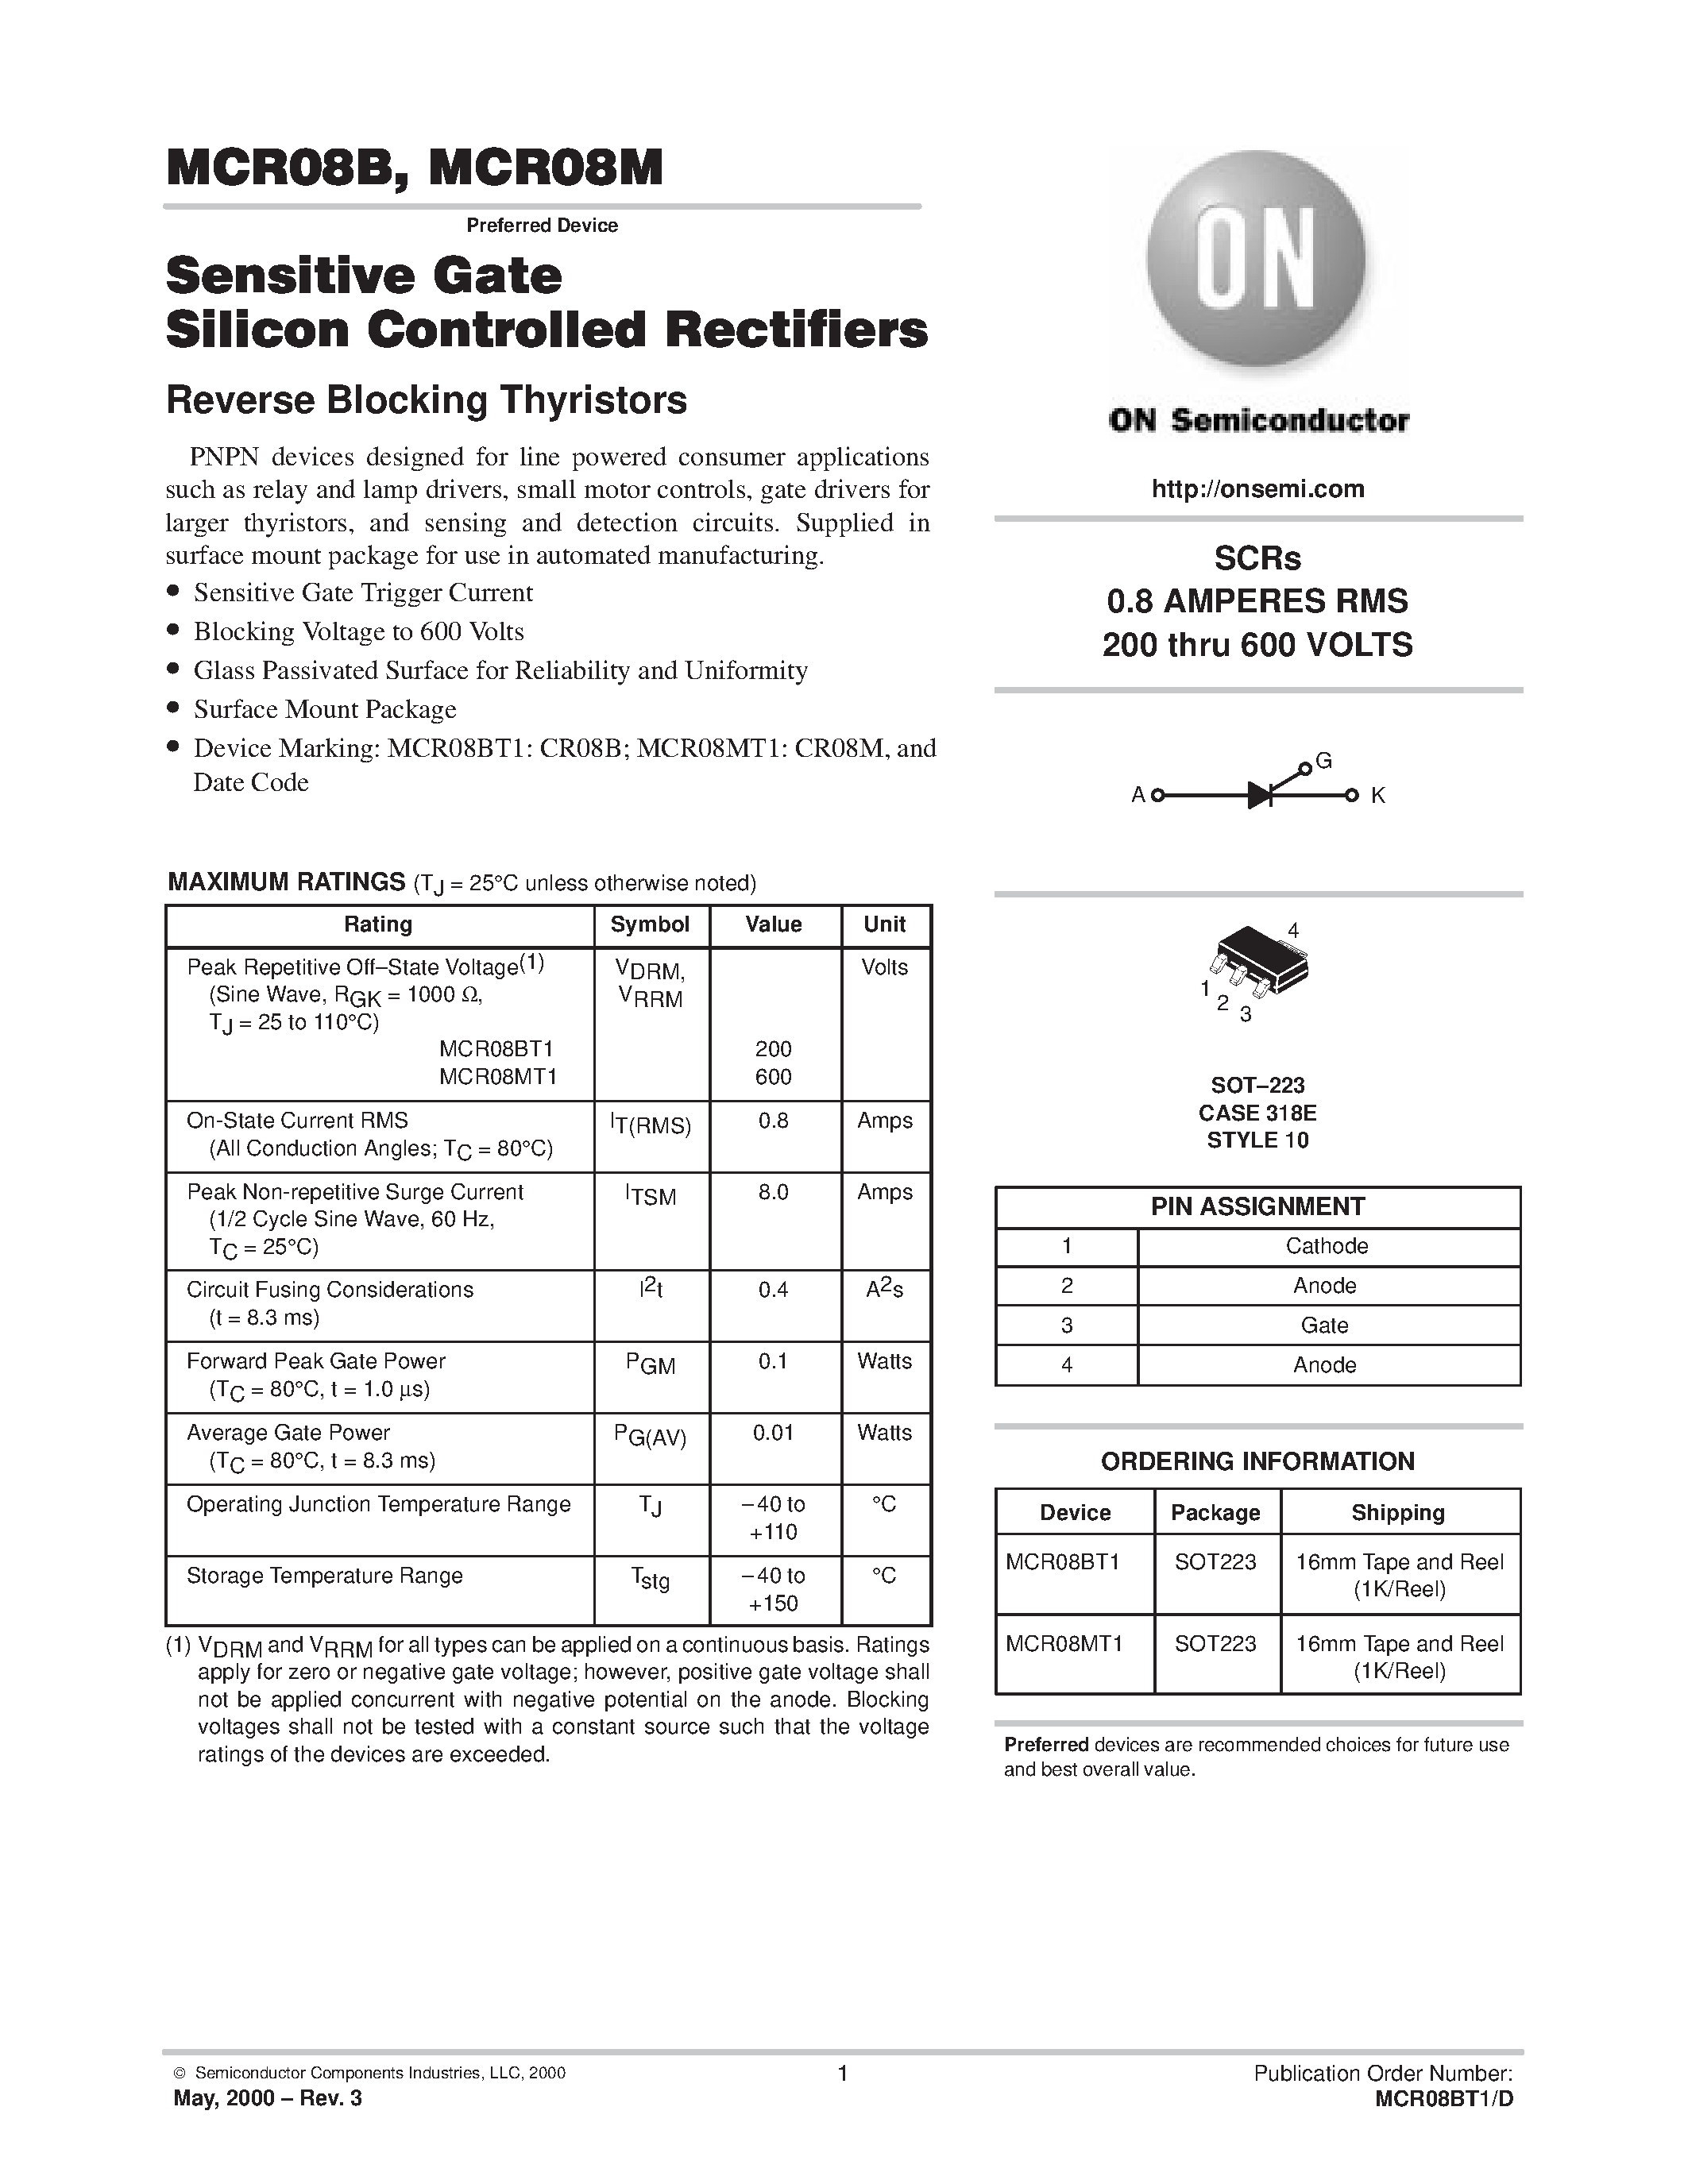 Datasheet MCR08MT1 - SENSITIVE GATE SILICON CONTROLLED RECTIFIERS page 1